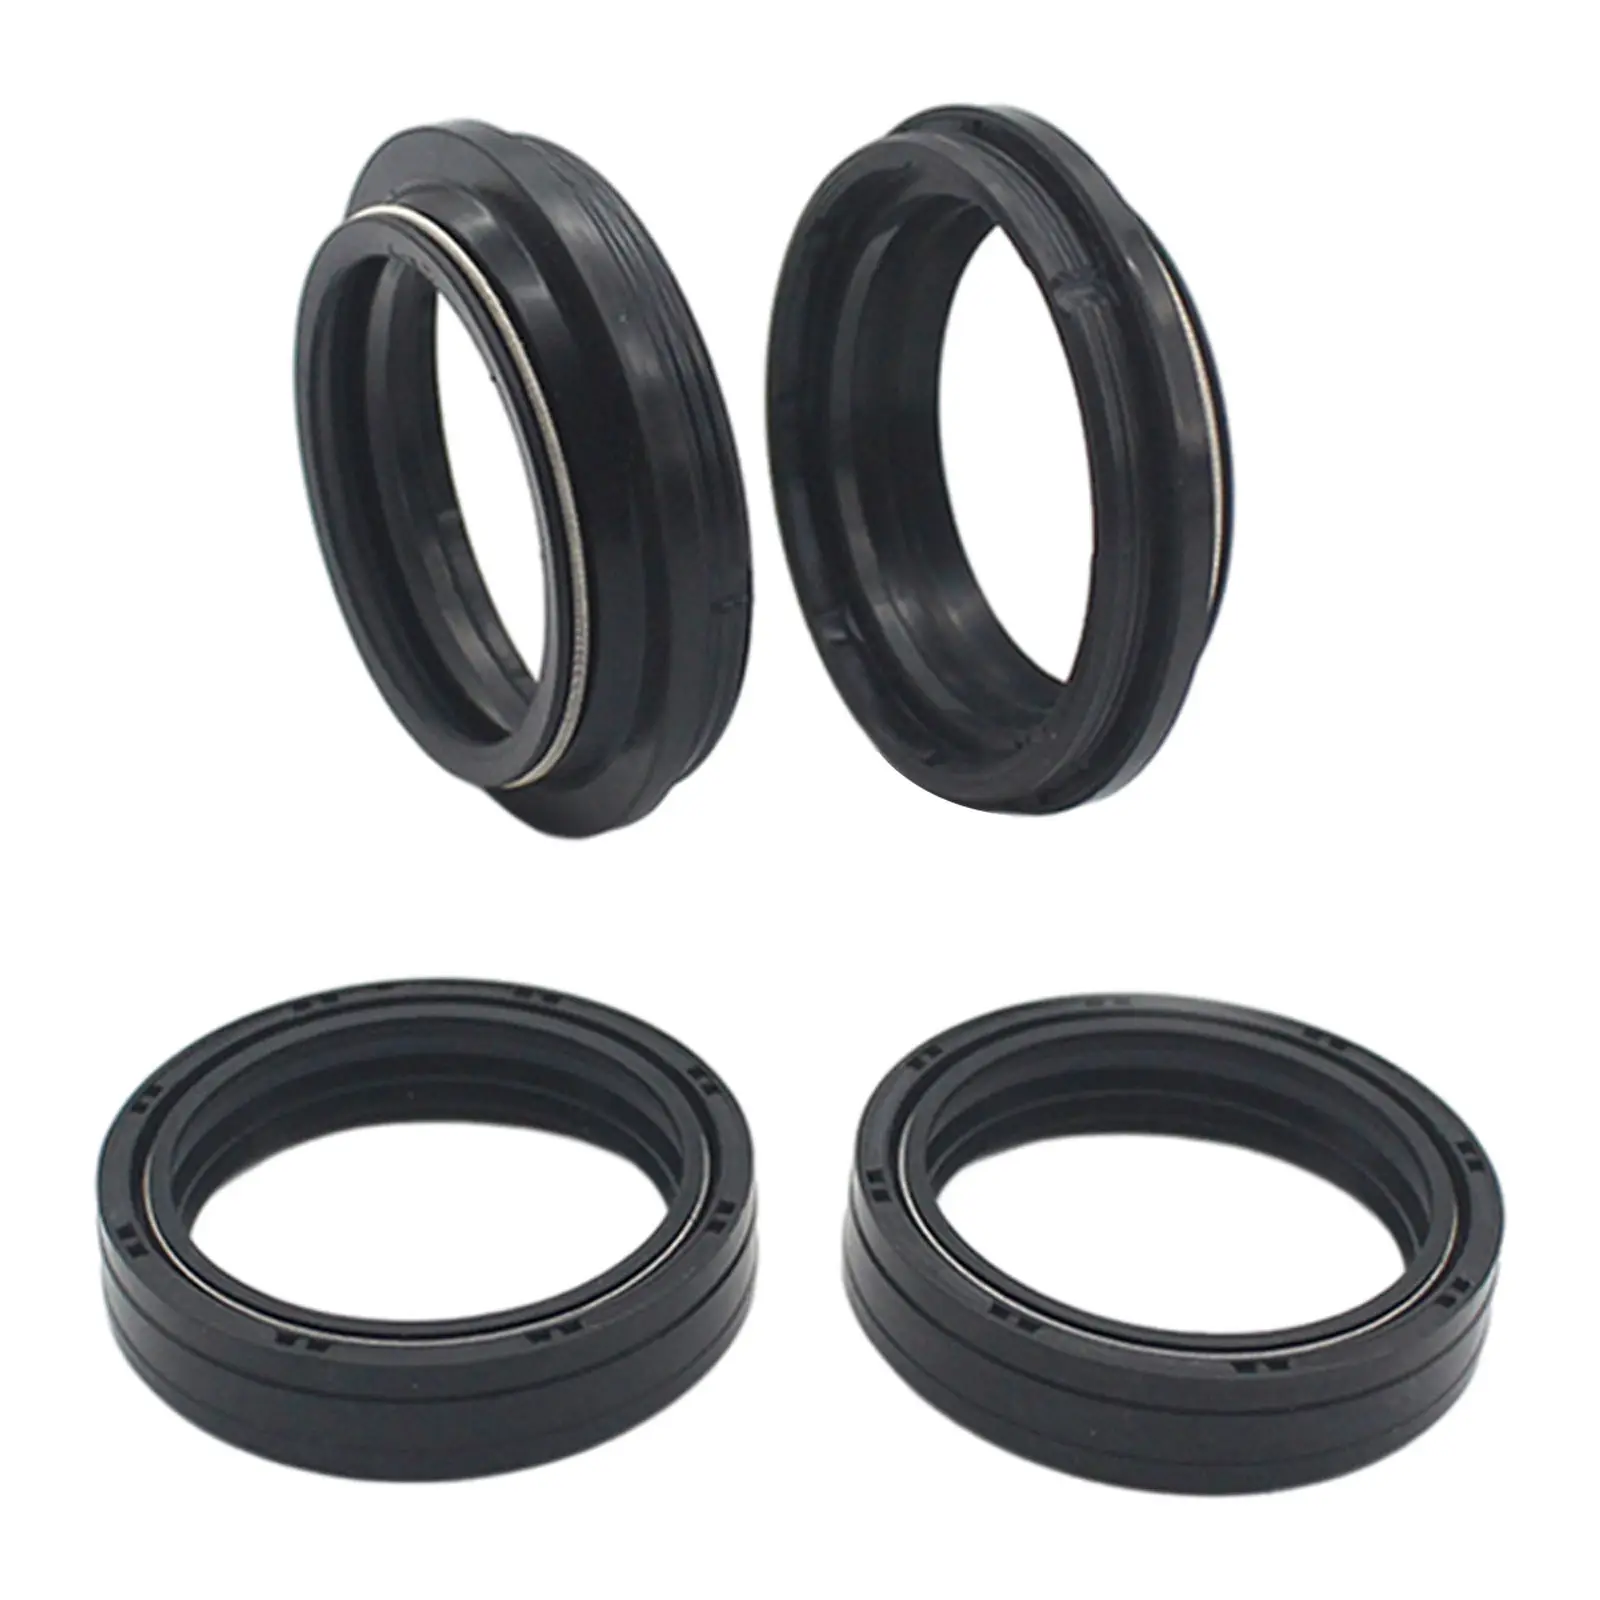 2 Pieces Fork and Dust Seal Kit Compatible Dust Seal Set Fit for R1200GS Adventure 2006-2012 for BMW F650CS ABS 2003-2005